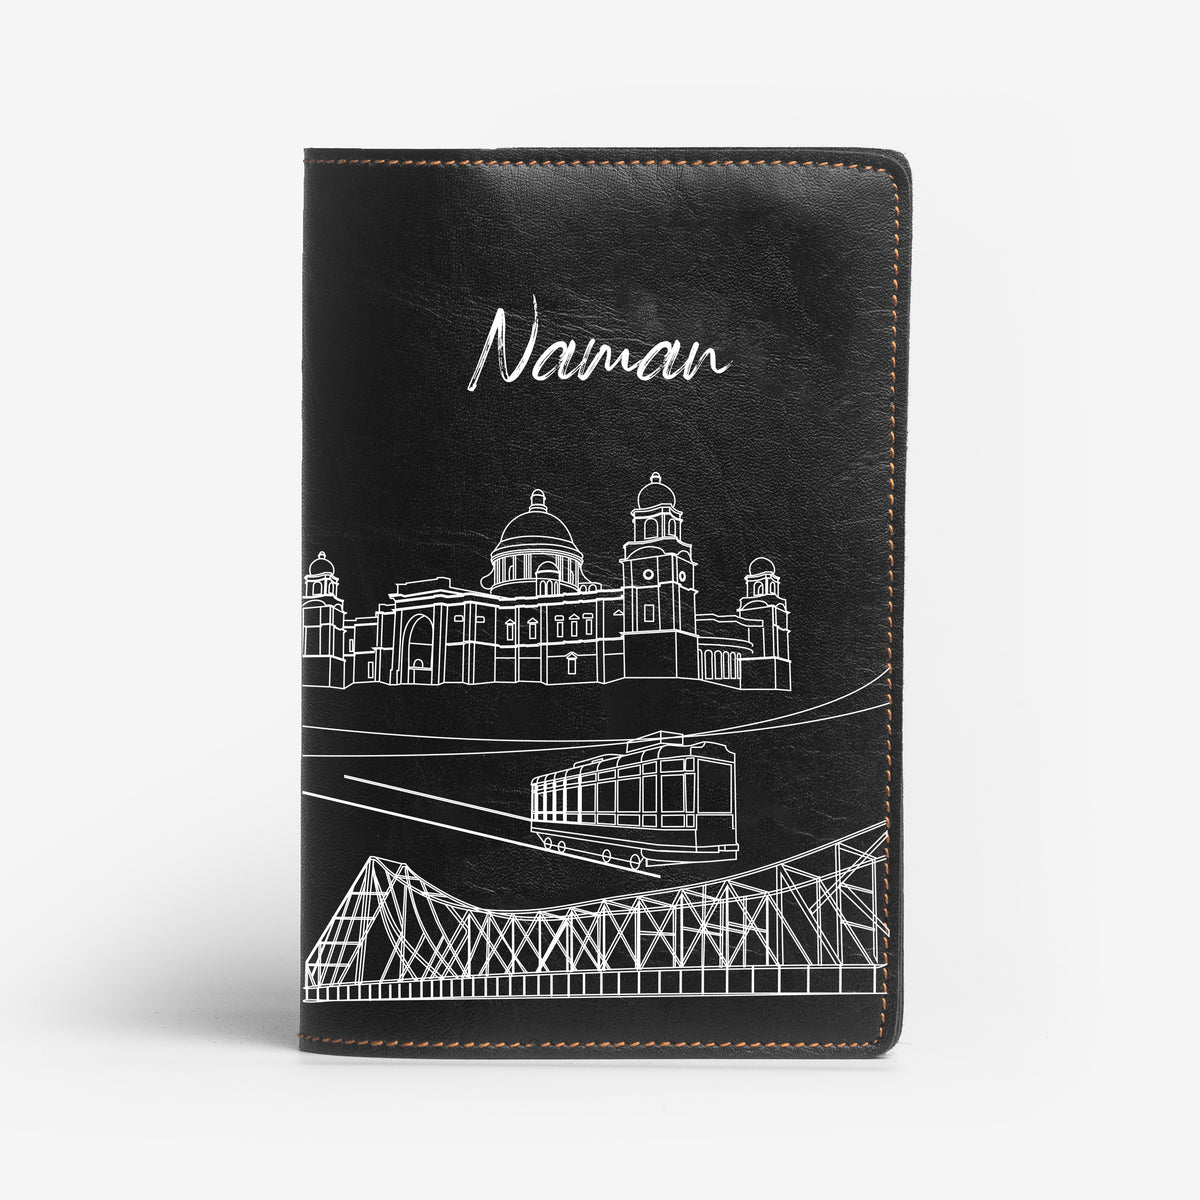 Personalized Passport Cover - Postcards from India - Kolkata